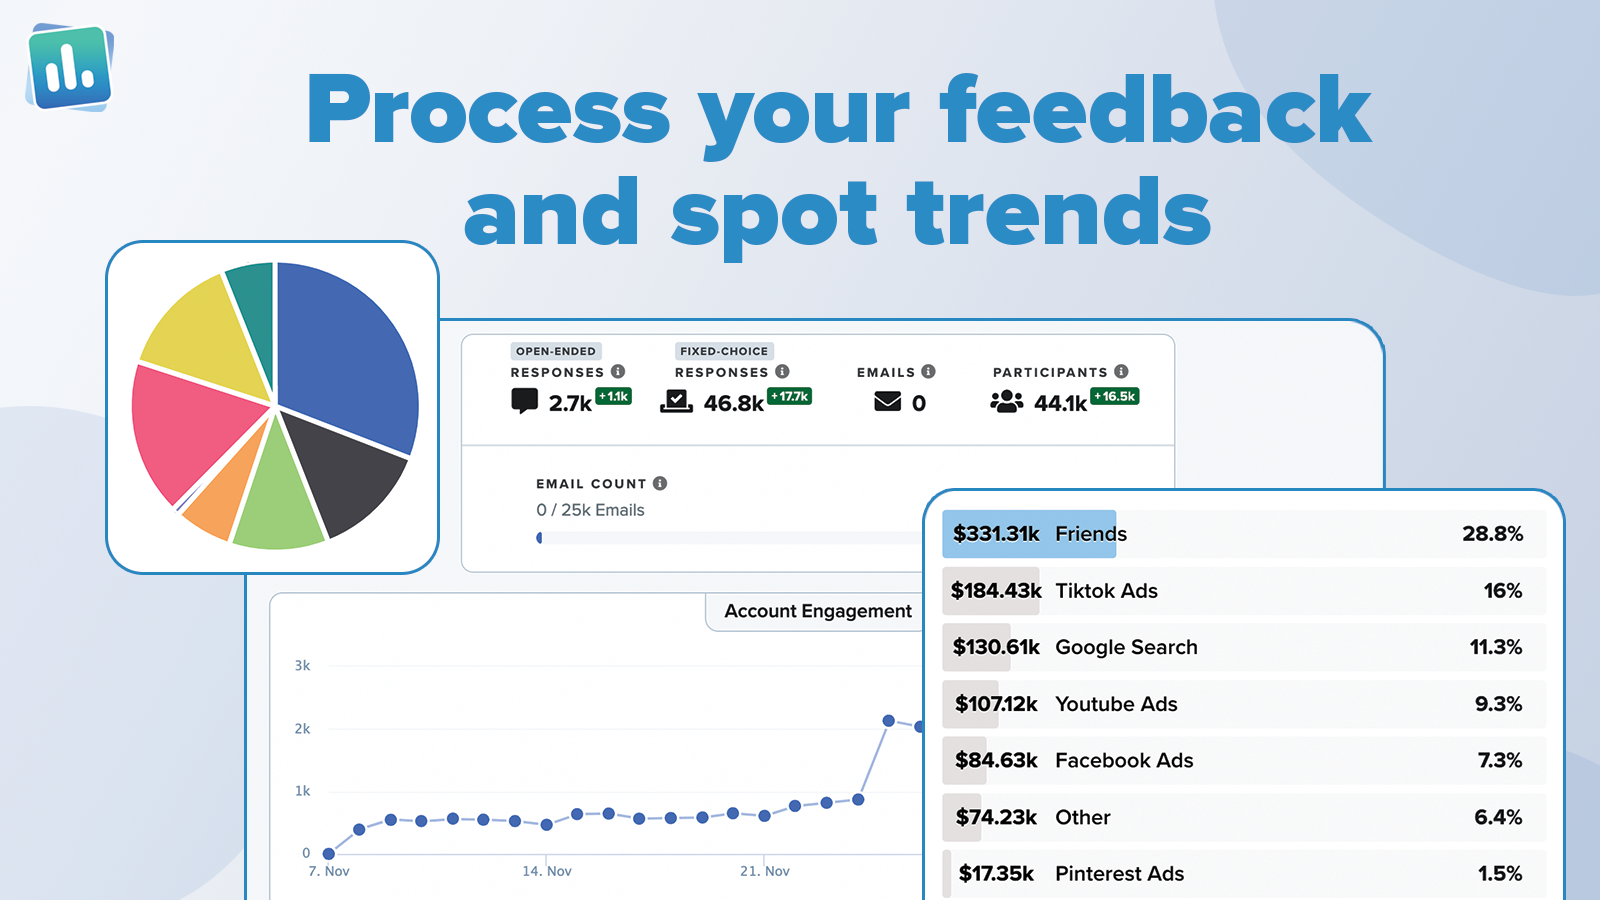 Process your feedback and spot trends.